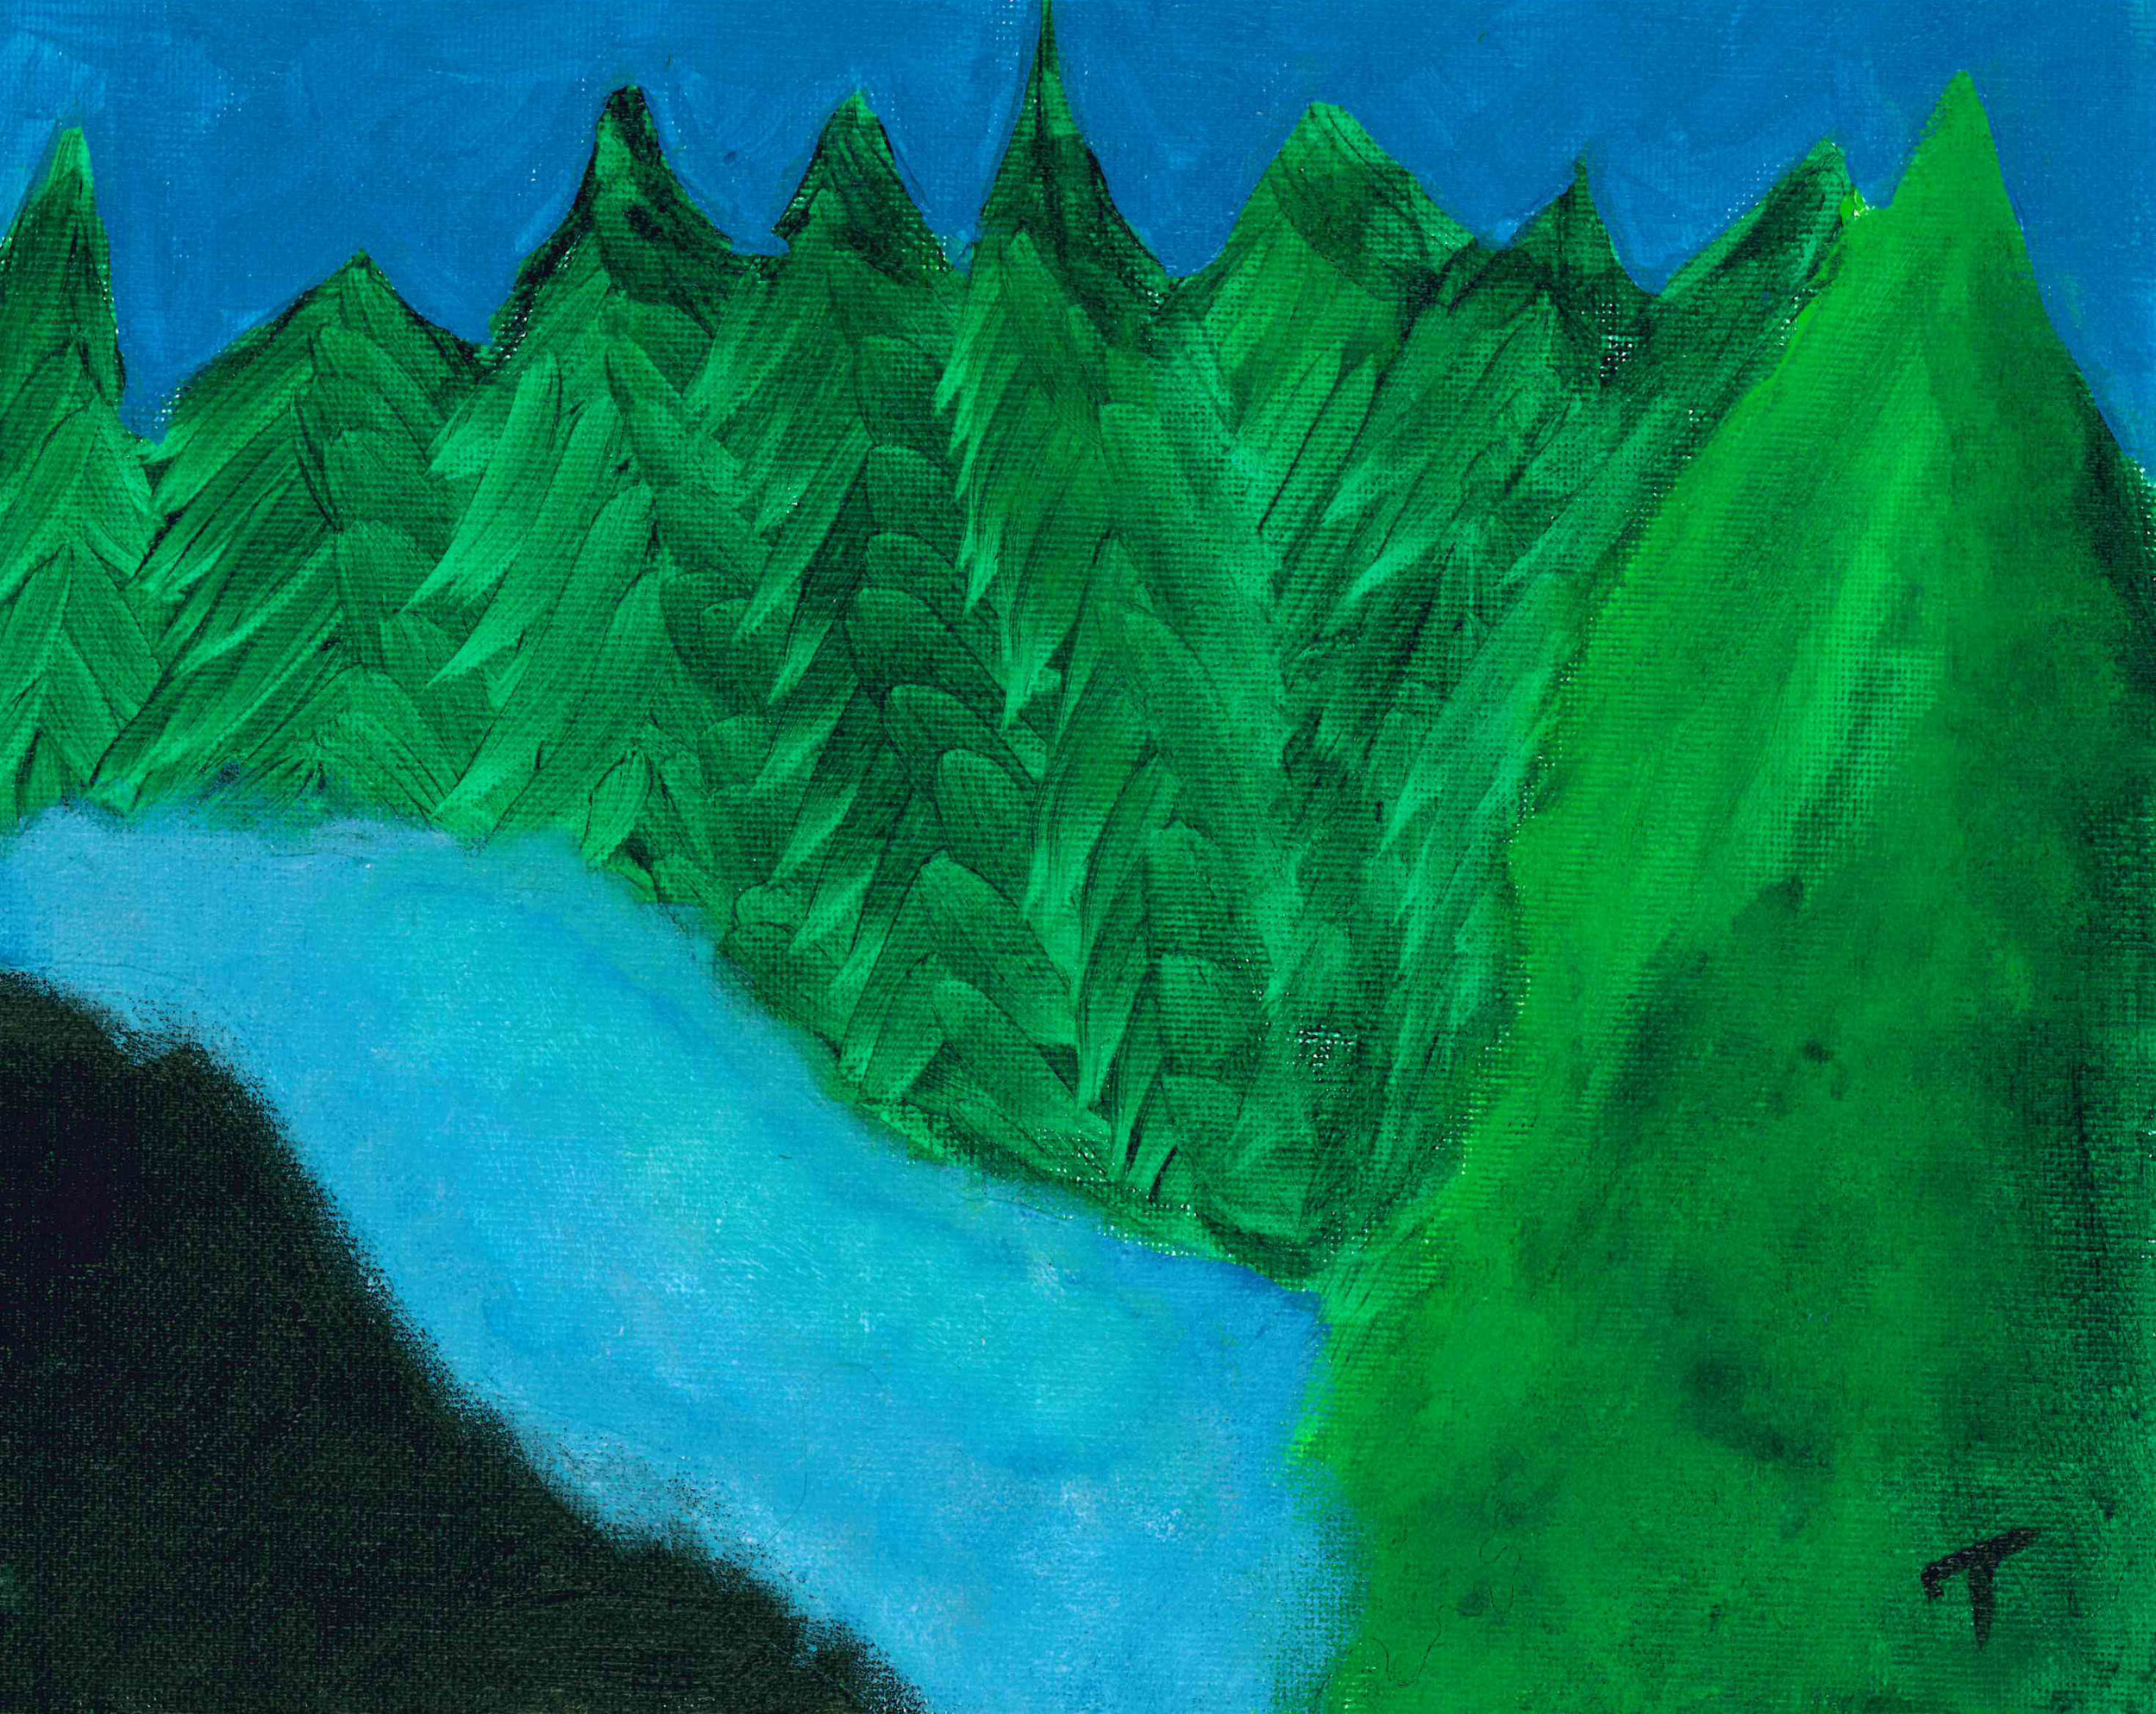 Peaceful River by Tegan Coughlin - 1st Place - Grades 6-8